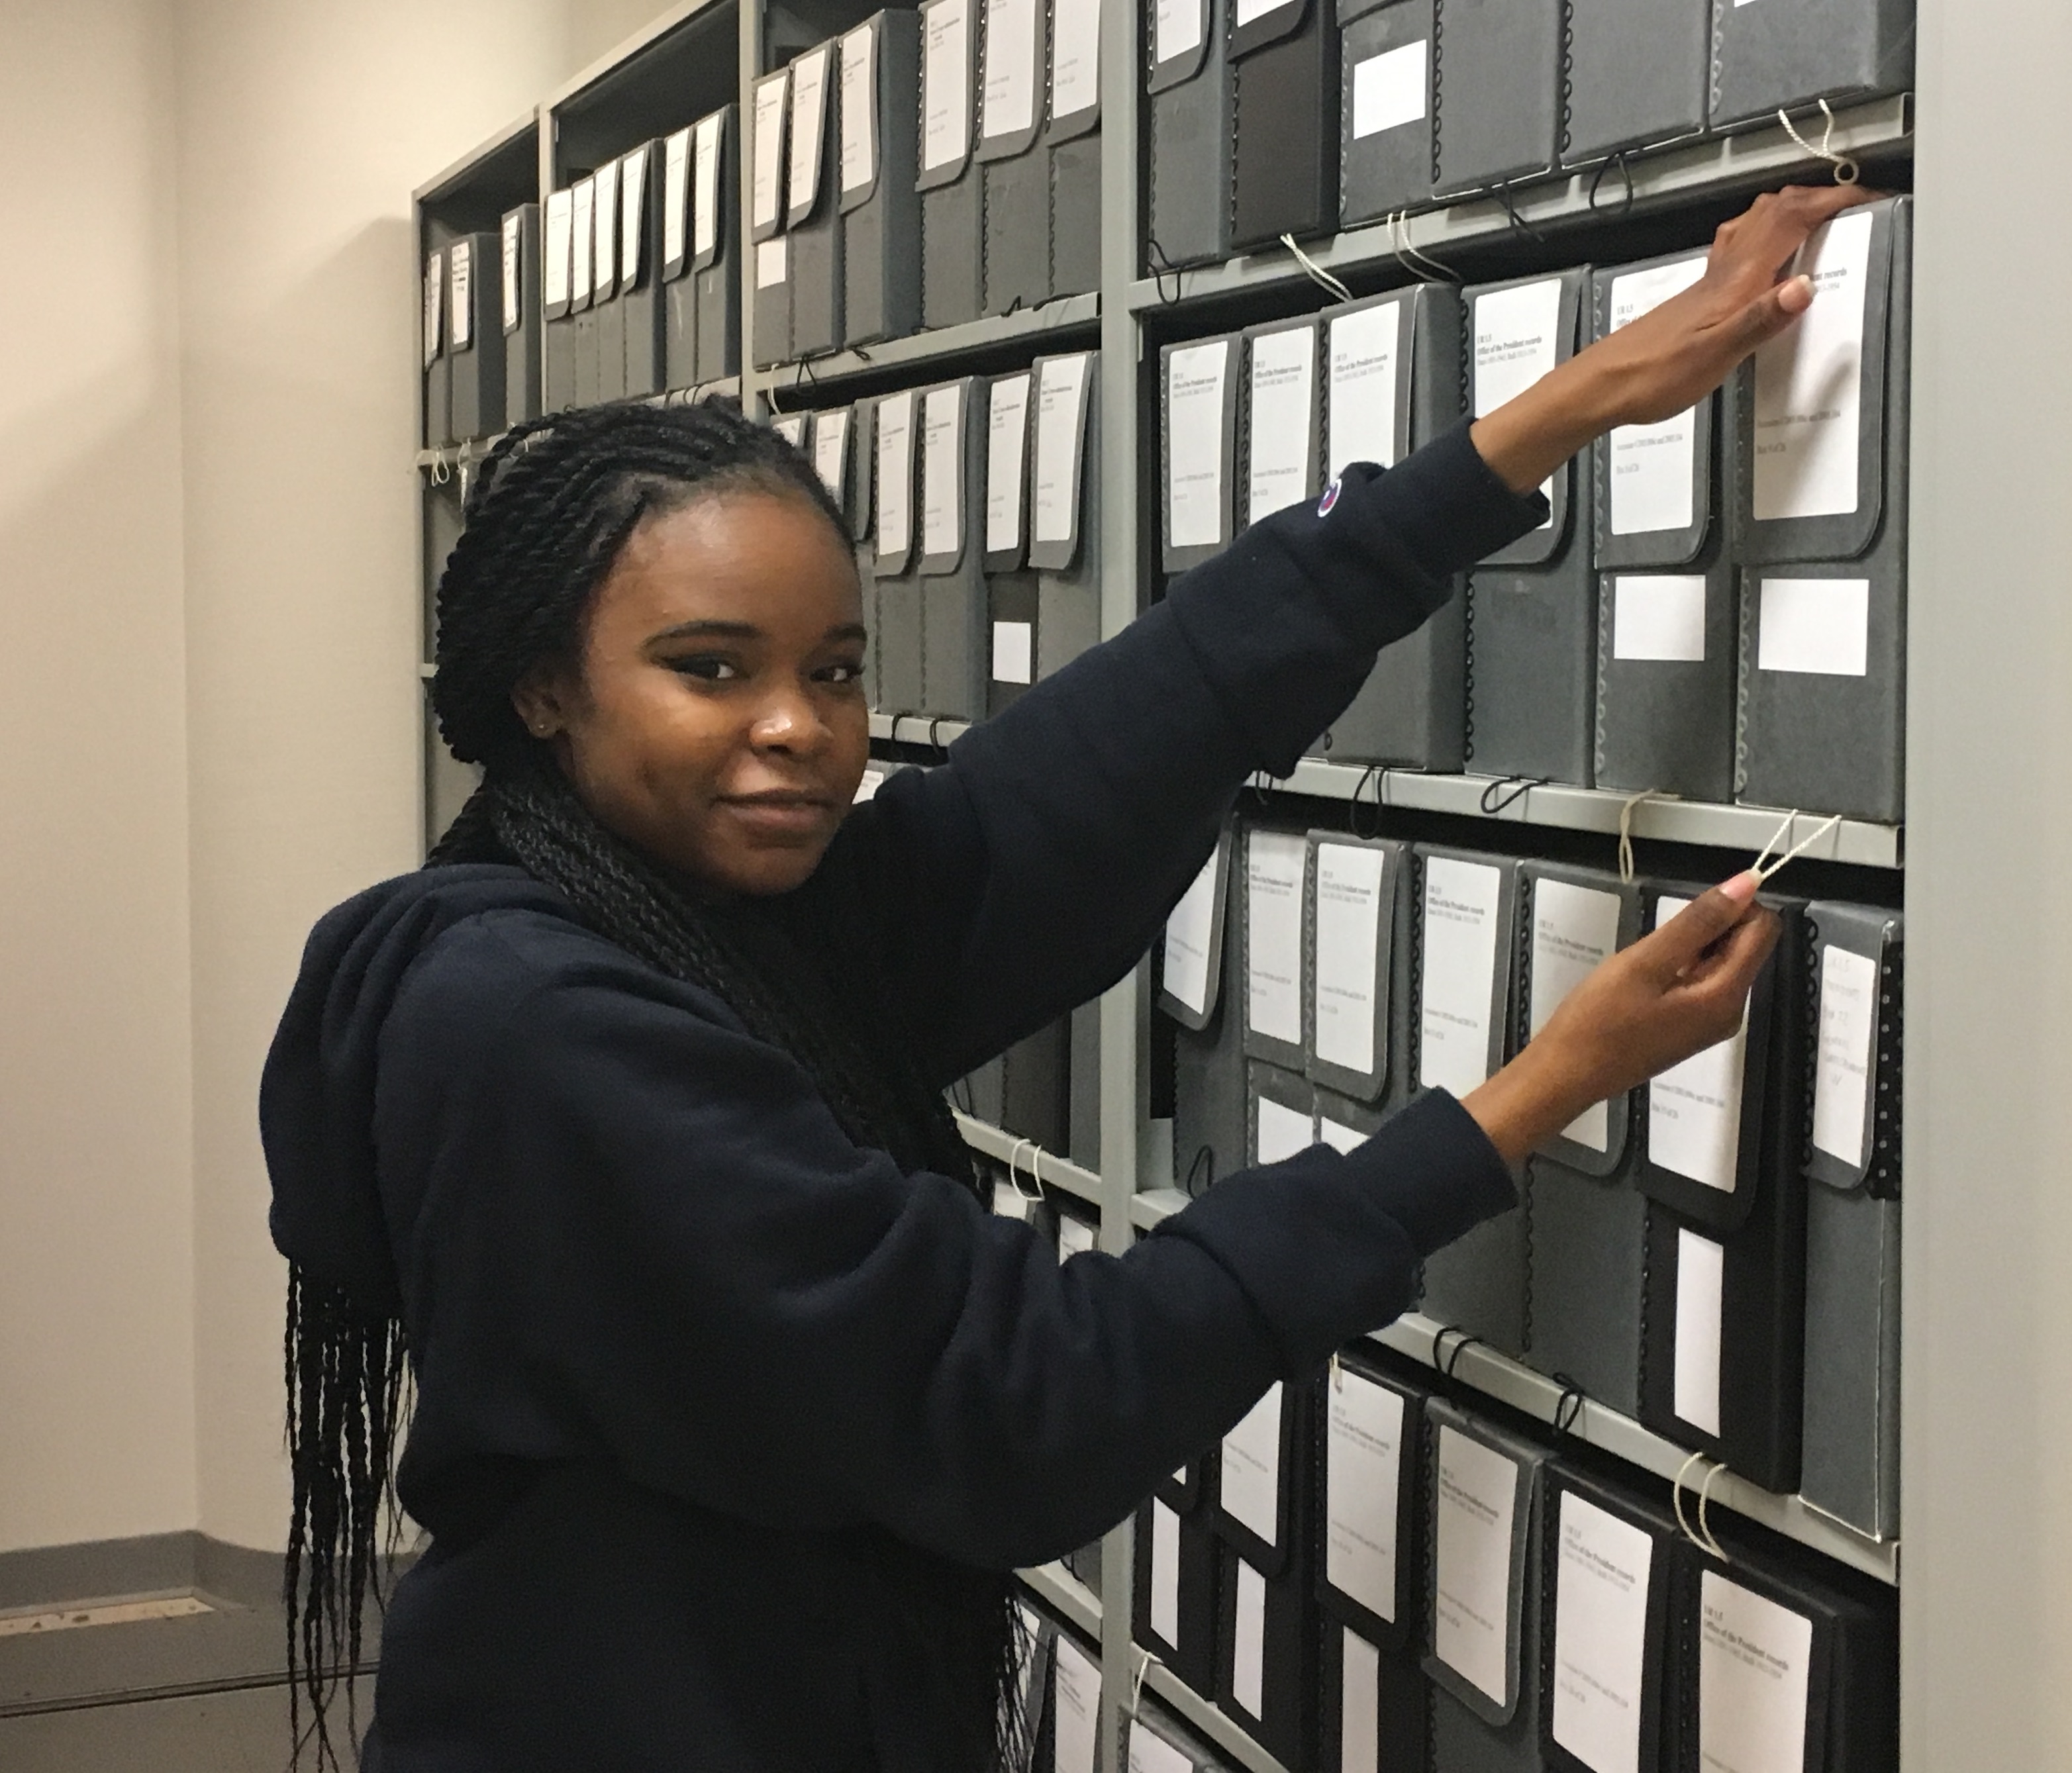 A young woman poses in front of shelves lined with folders of archival materials